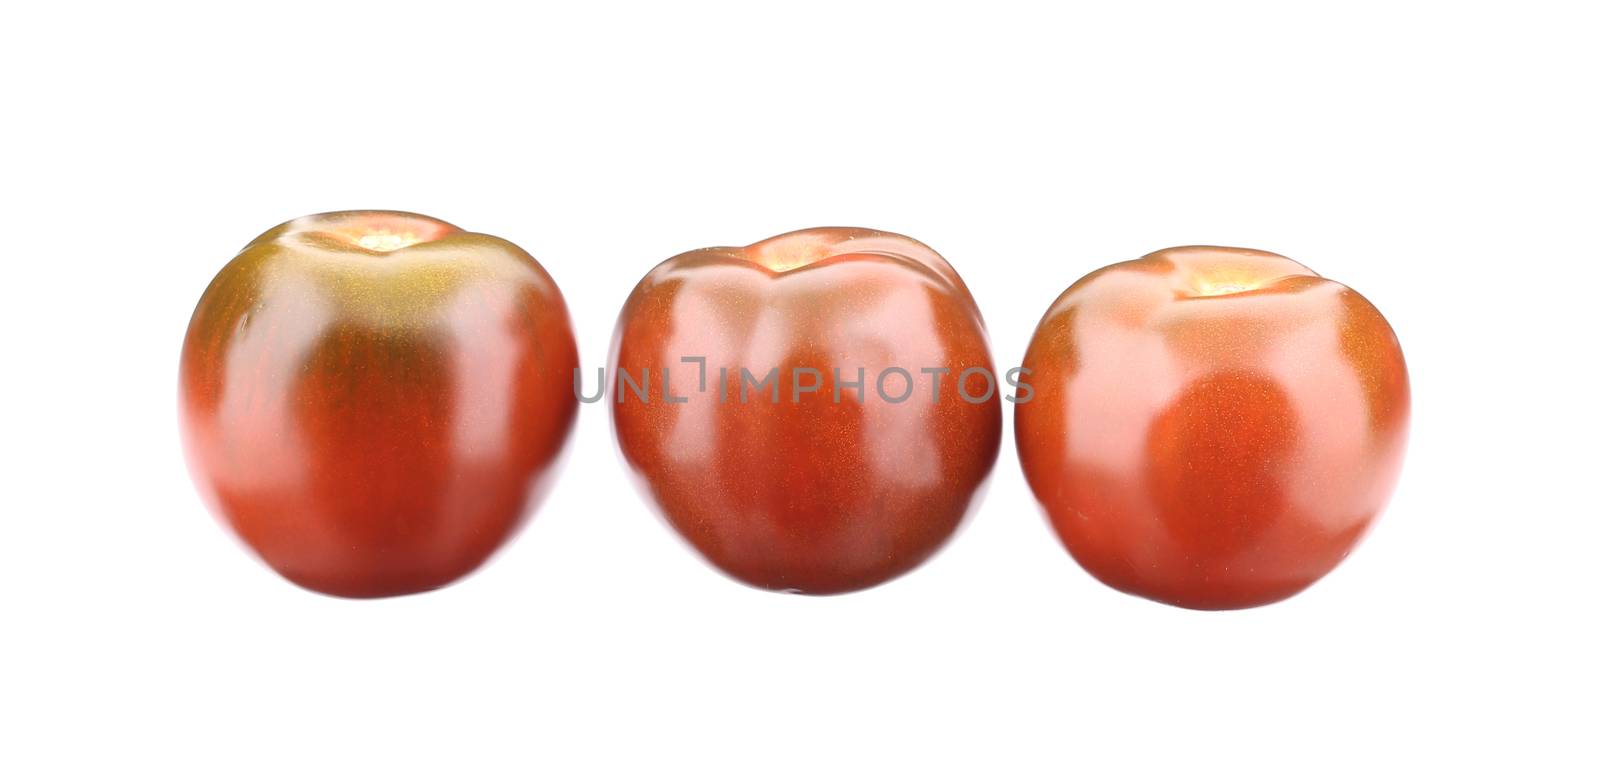 Close up of tomatoes. Isolated on a white background.